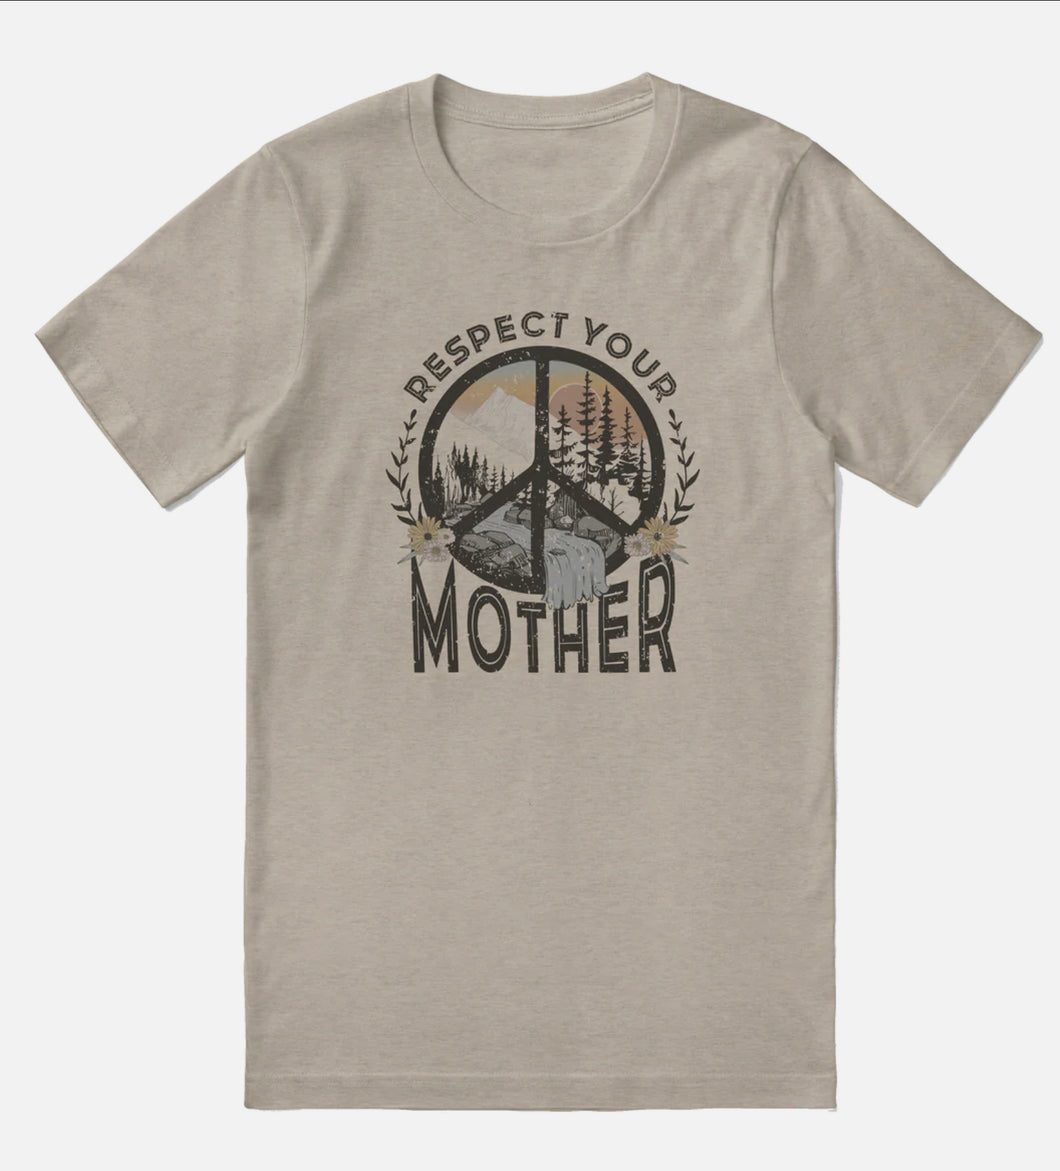 Respect your mother tee shirt